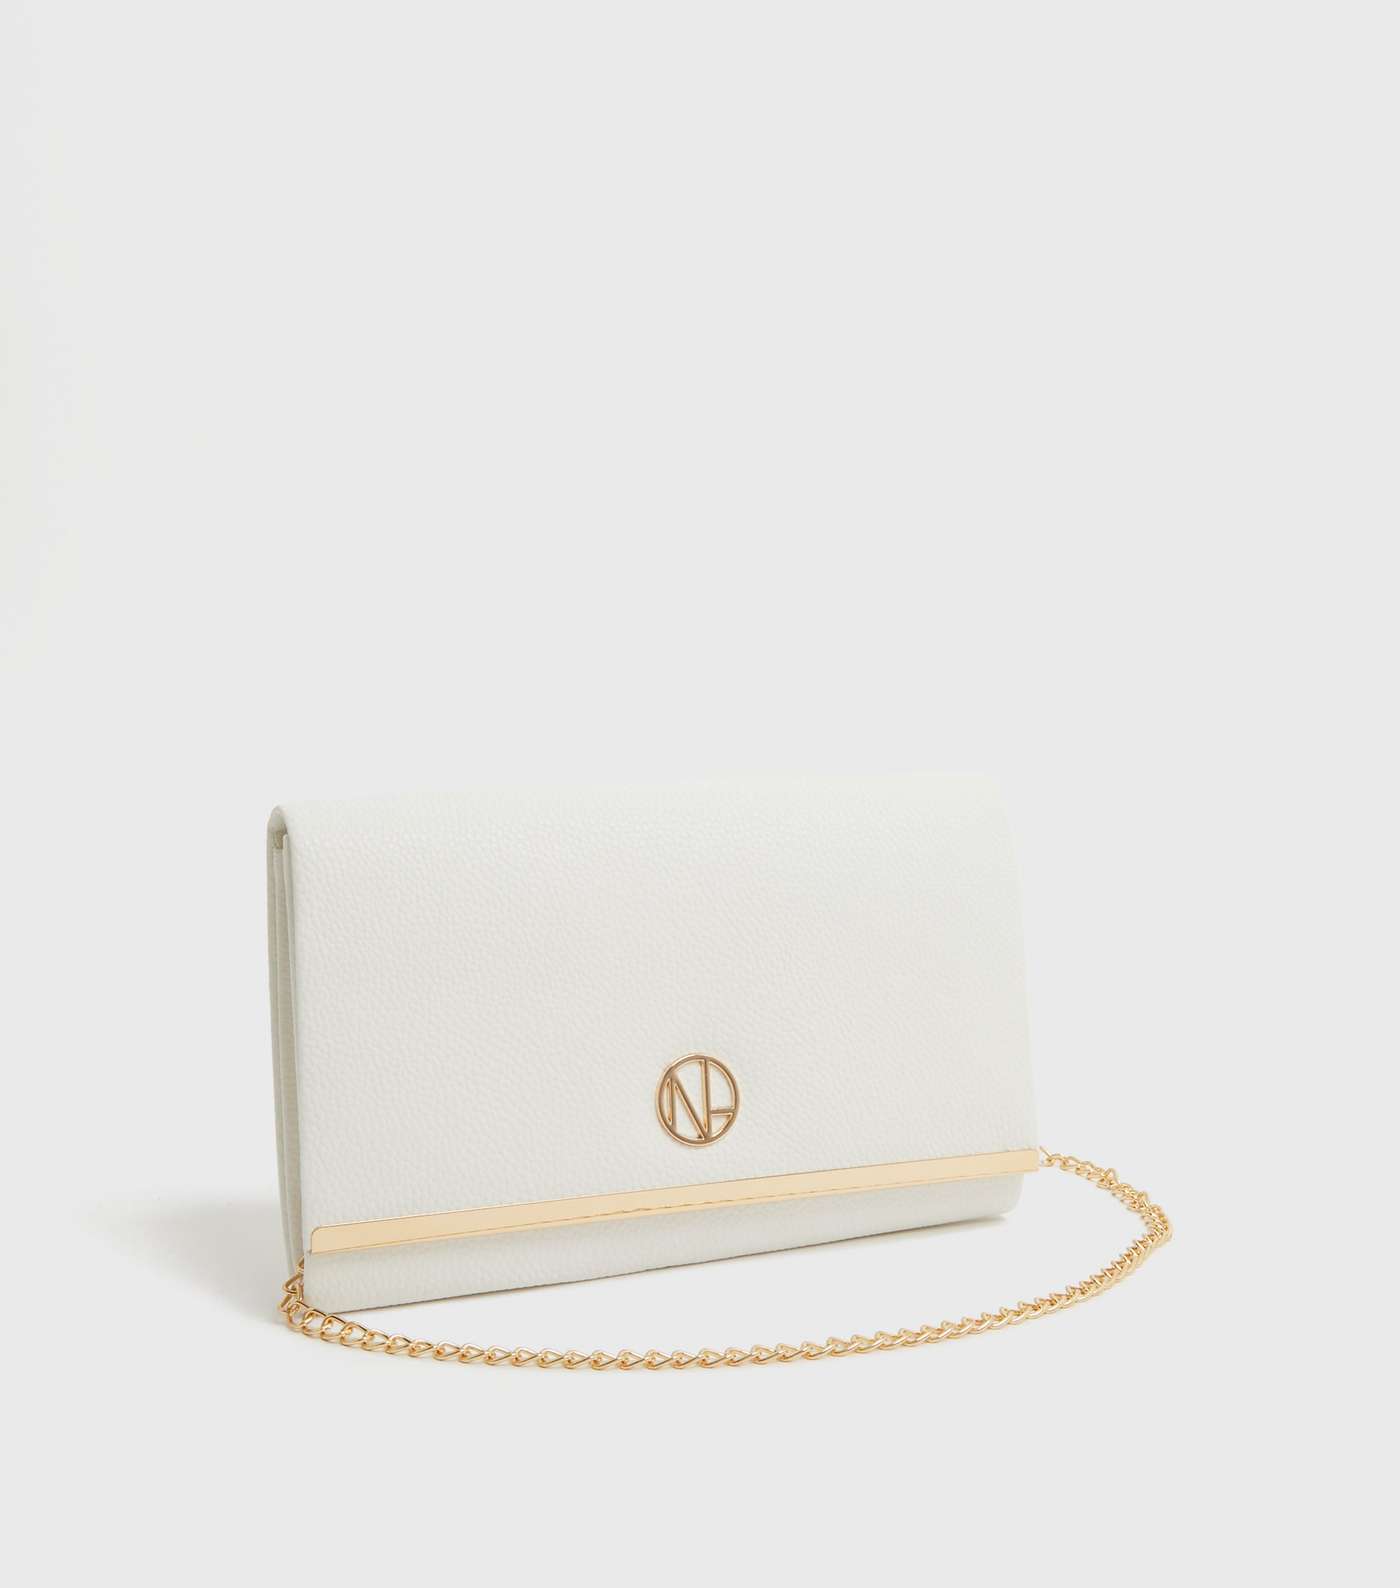 White Embellished Chain Clutch Bag Image 3